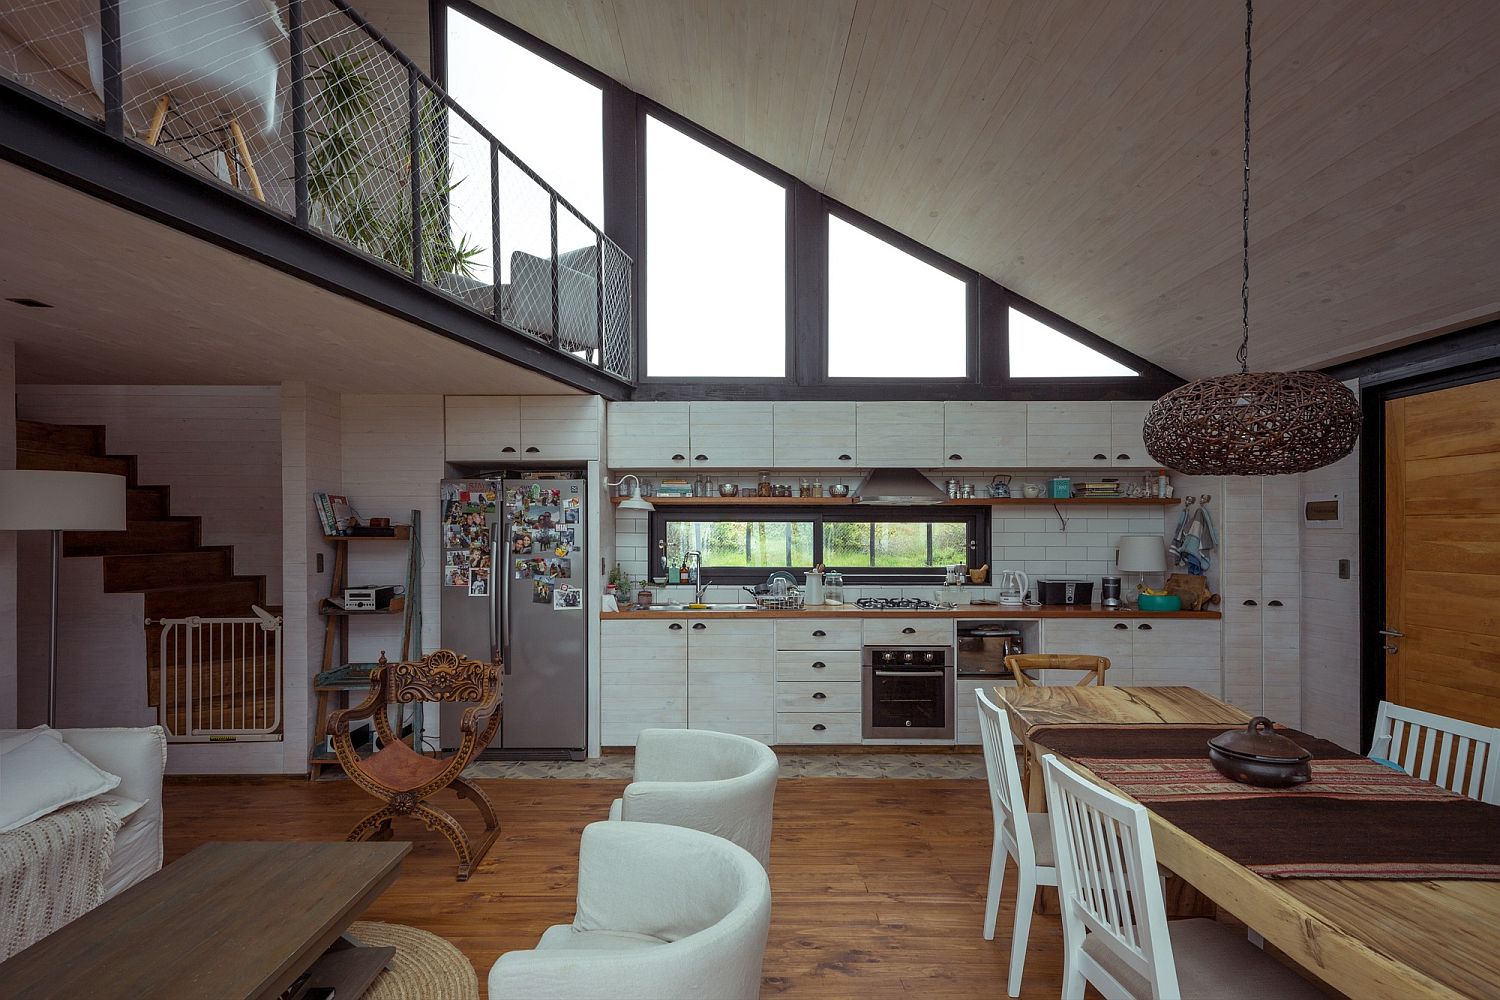 Sloped ceiling of the kitchen and dining area